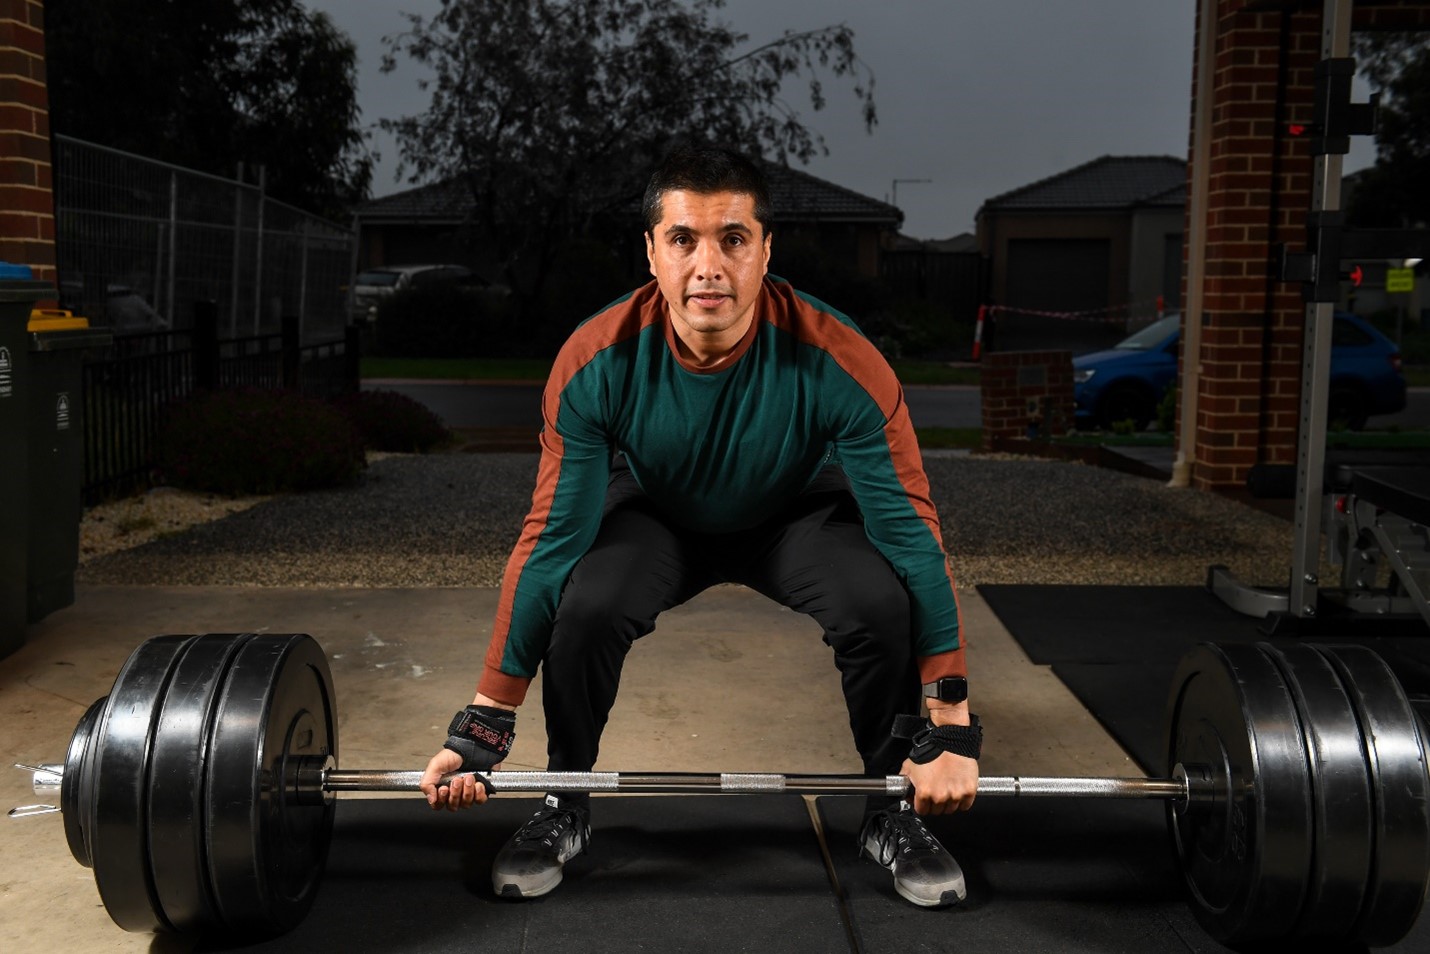 Man crouchs to pick up weights